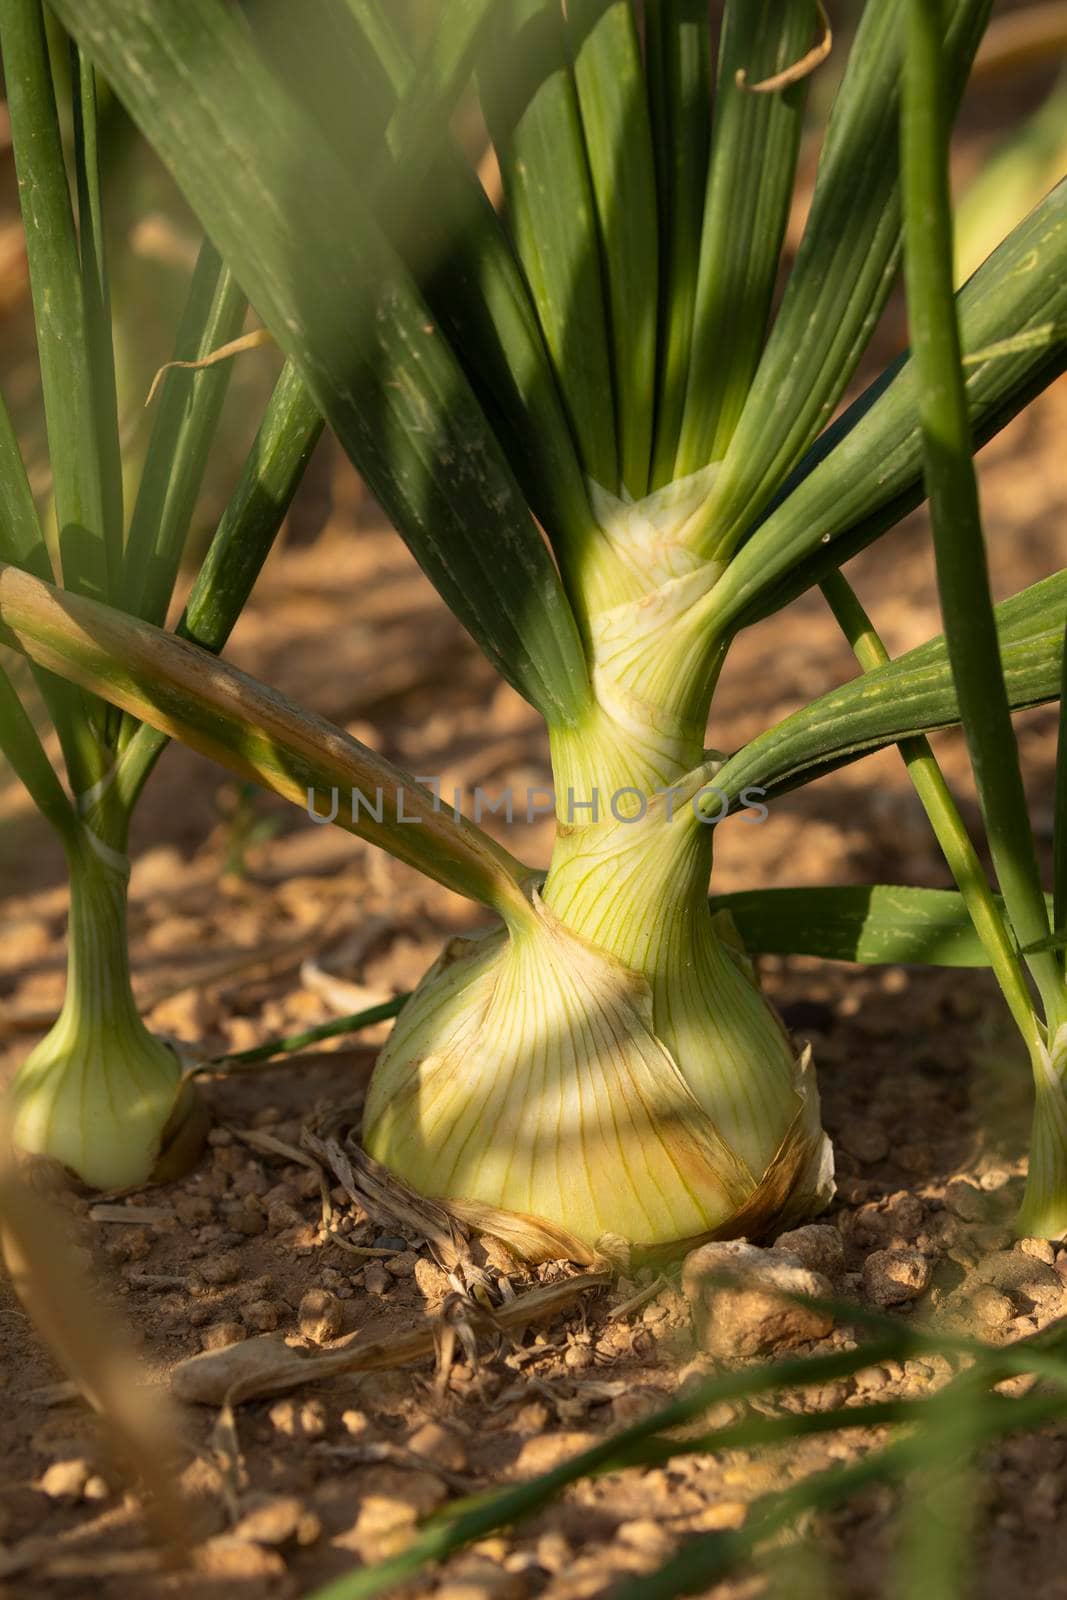 Growing onions in a farm field, a seasonal food, in the agricultural areas surrounding Gallur, a town in Aragon, Spain. Primary sector, agriculture.